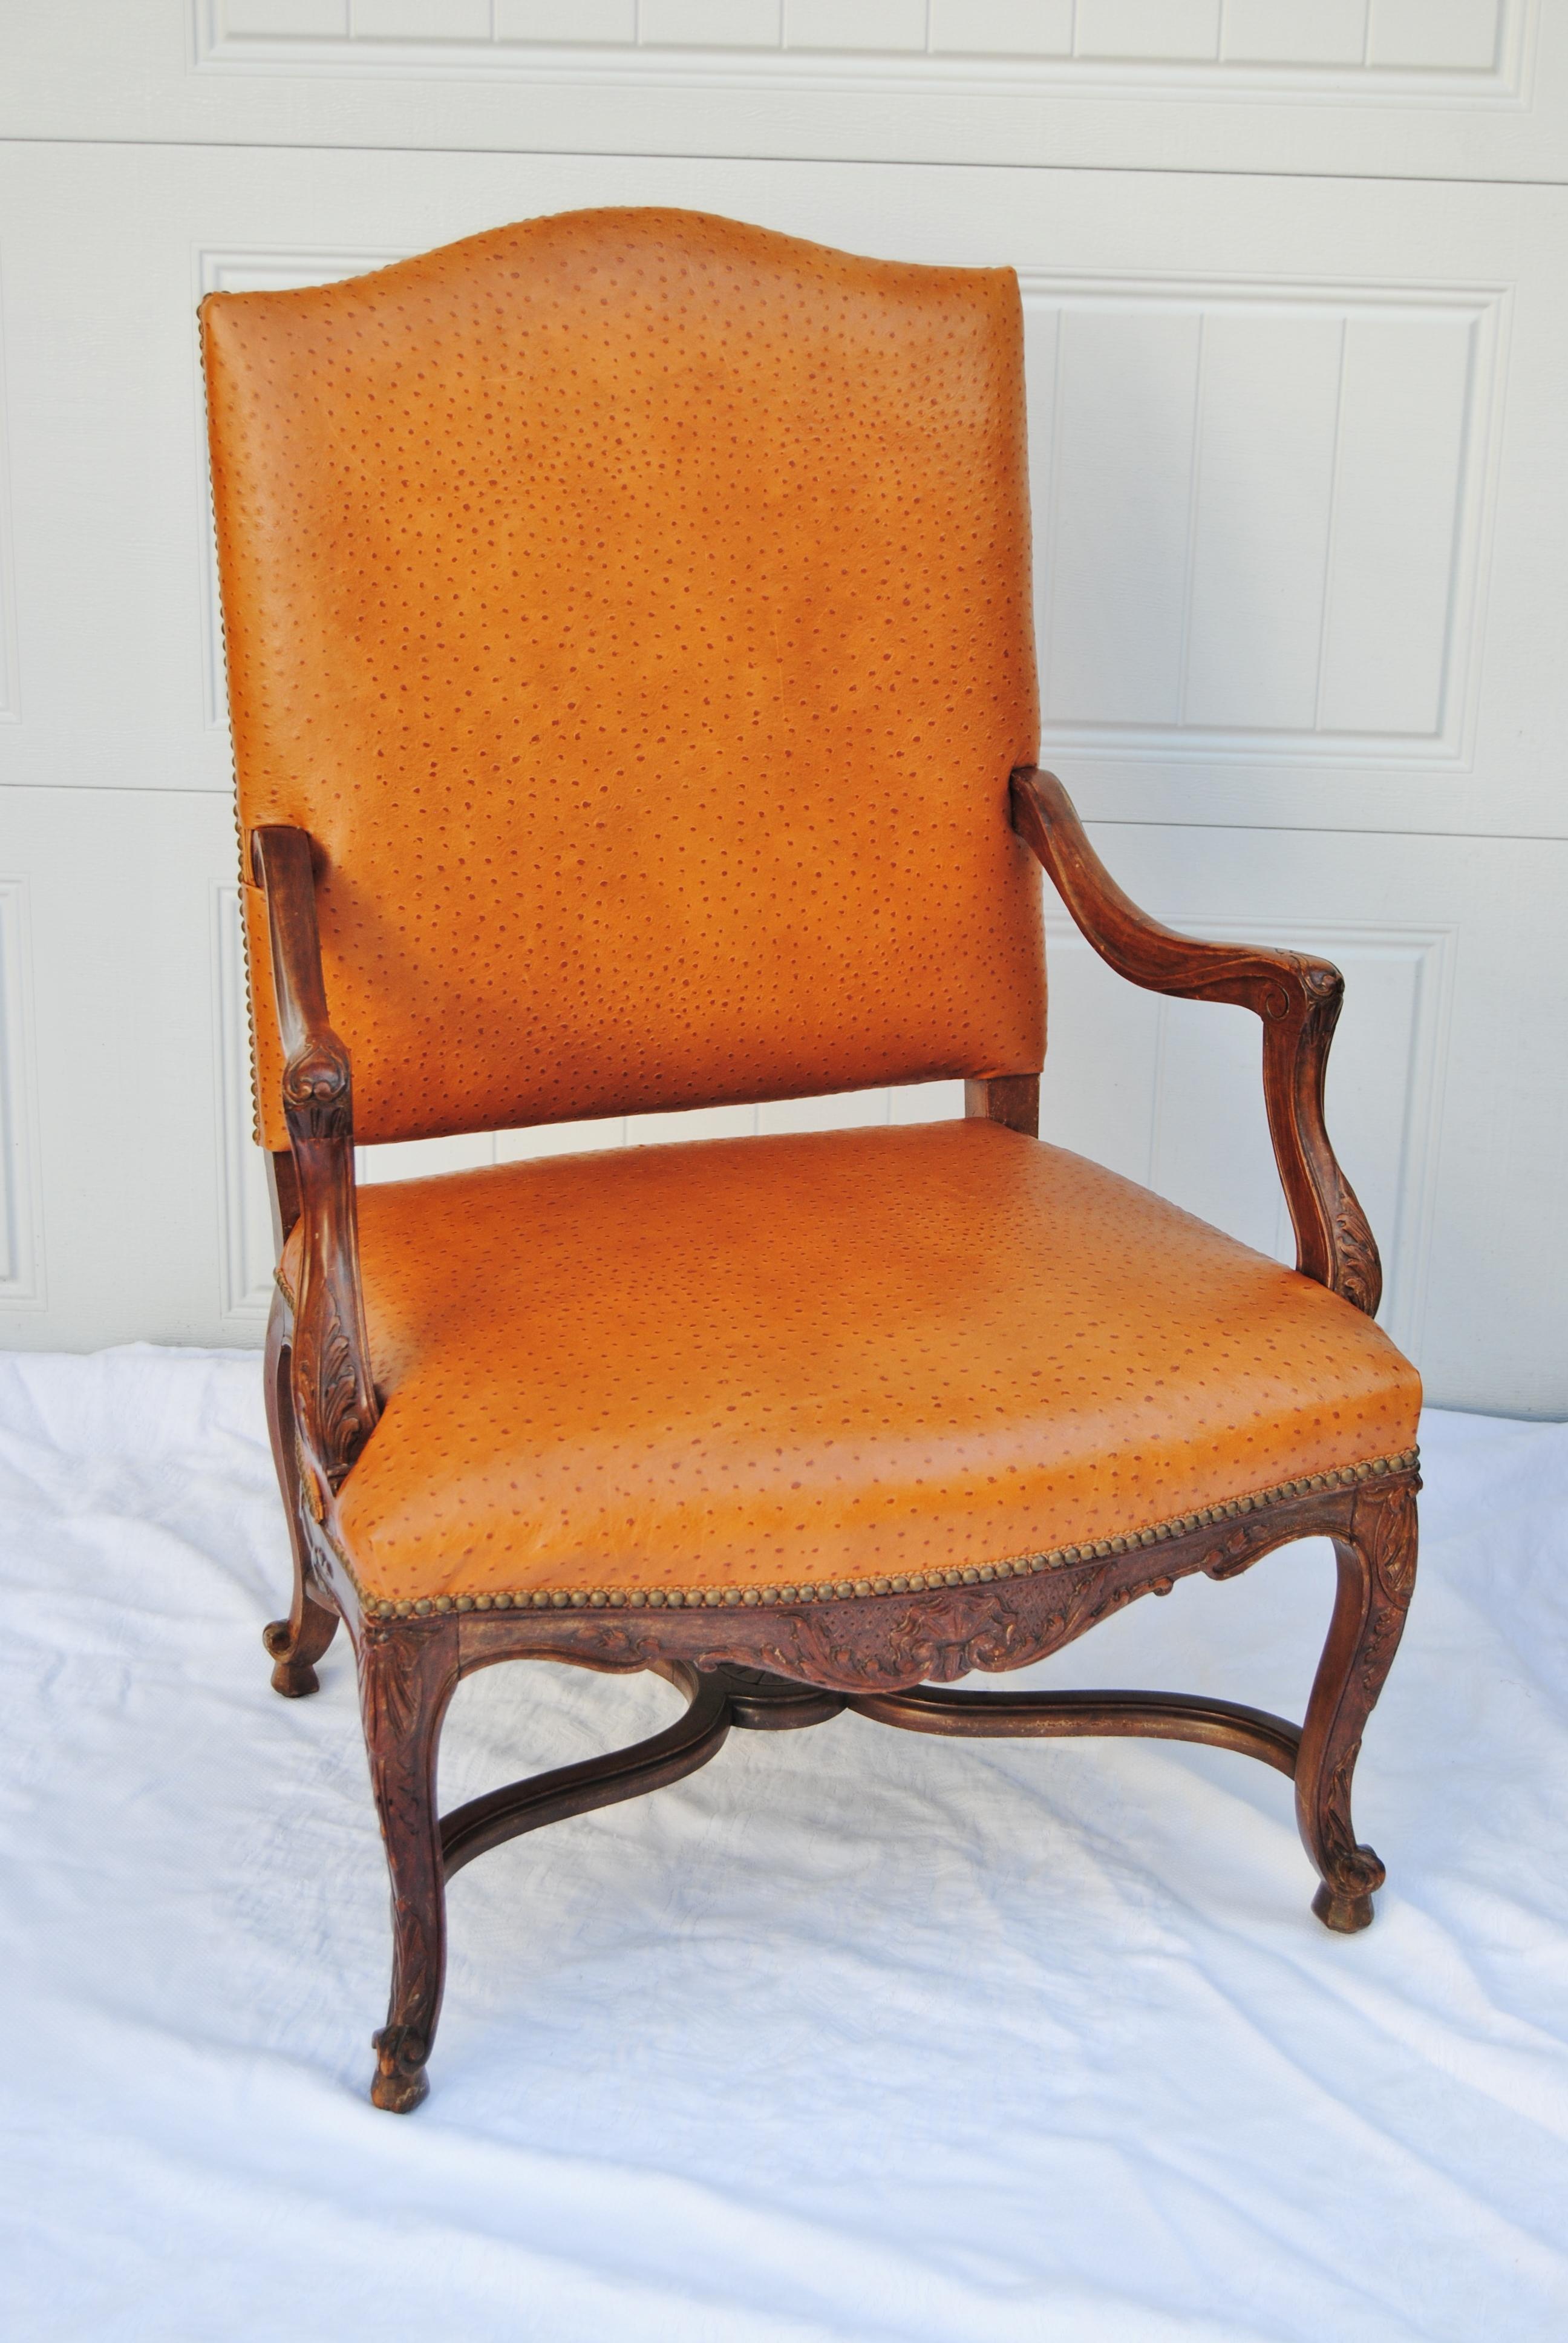 Vintage French fauteuil newly upholstered in Edelman faux cowhide leather. Chair is finished with antique gimp and nailhead trim. This is a heavy chair with hand carved apron. It is in good condition with original finish.